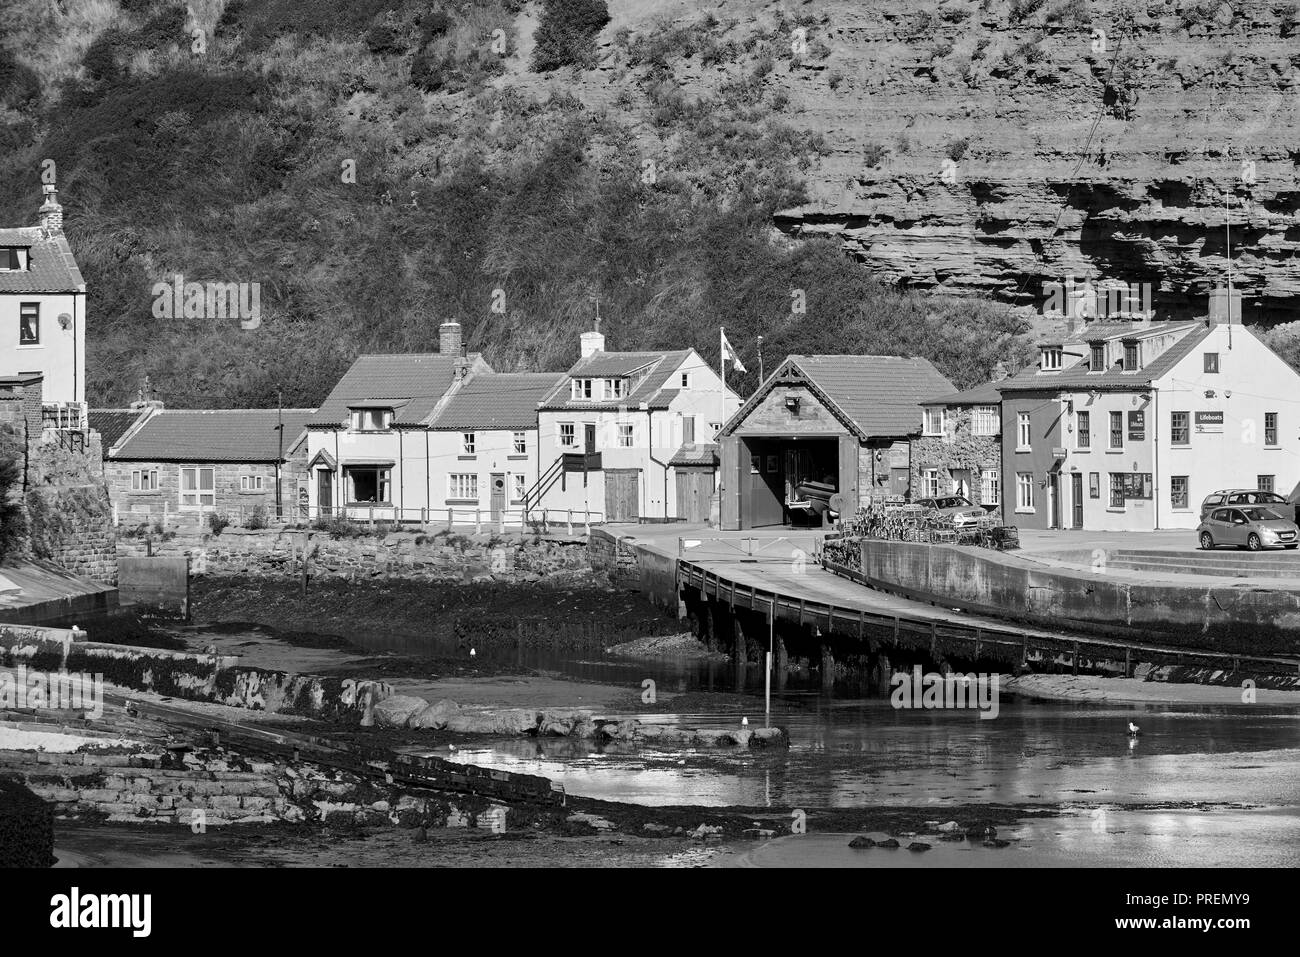 The historic village of Staithies, North Yorkshire coast , North East England, UK Stock Photo